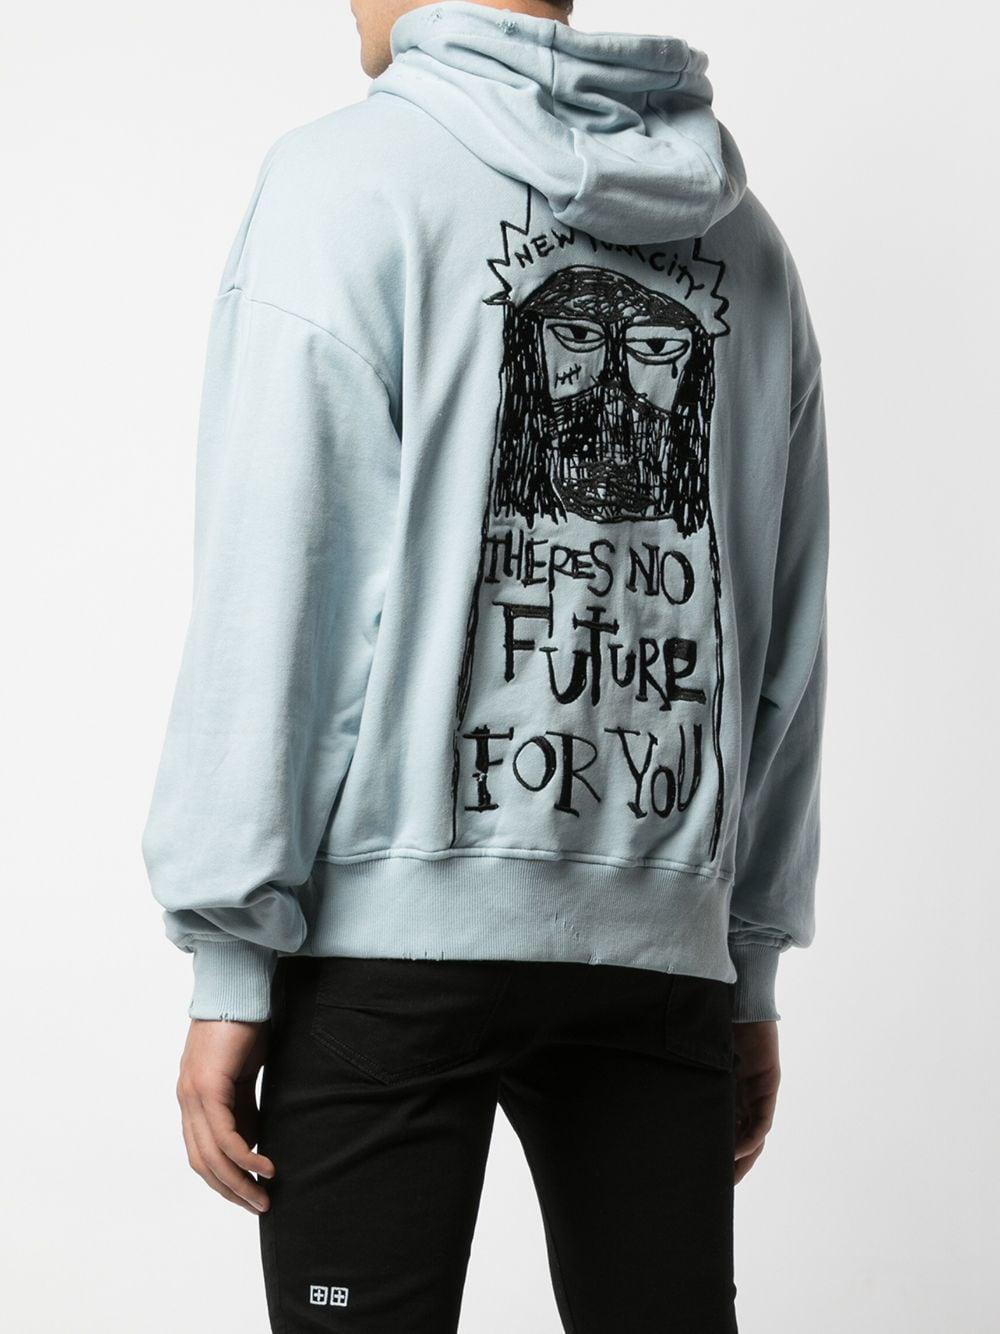 Haculla Cotton 'there's No Future For You' Hoodie in Blue for Men - Lyst